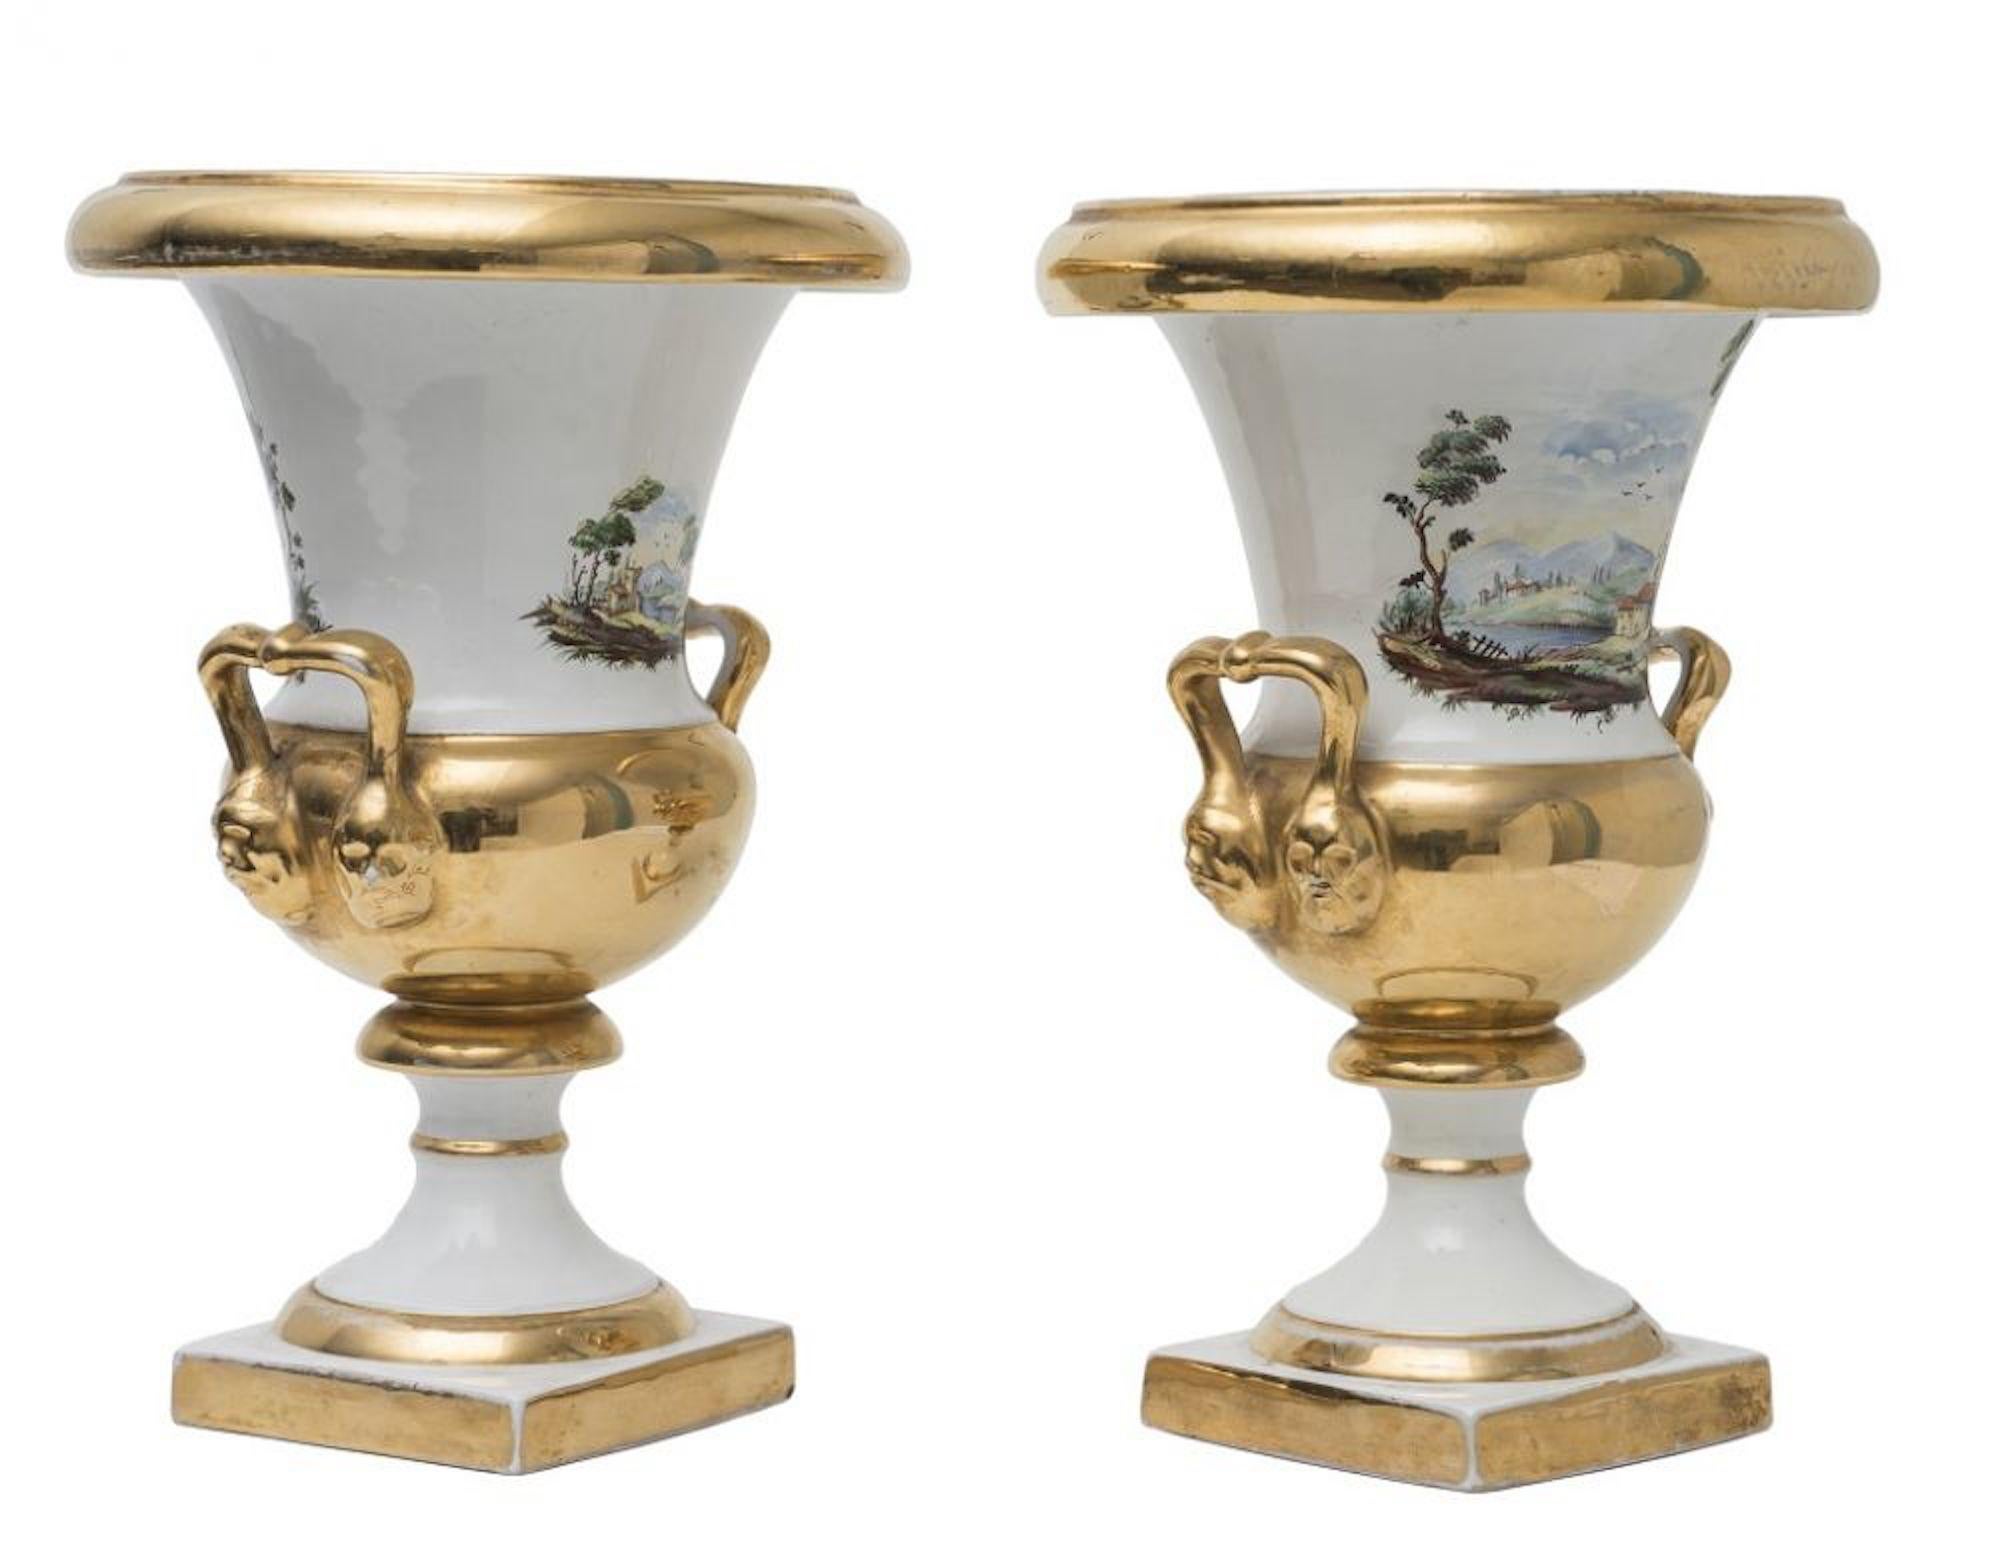 This pairof porcelain vases is a beautiful original decorative object realized by an Italian manufacturer in the 19th century. Medicean style.

Beautiful painted country scenes appear on the necks of the vases. 

Good conditions.

This artwork is